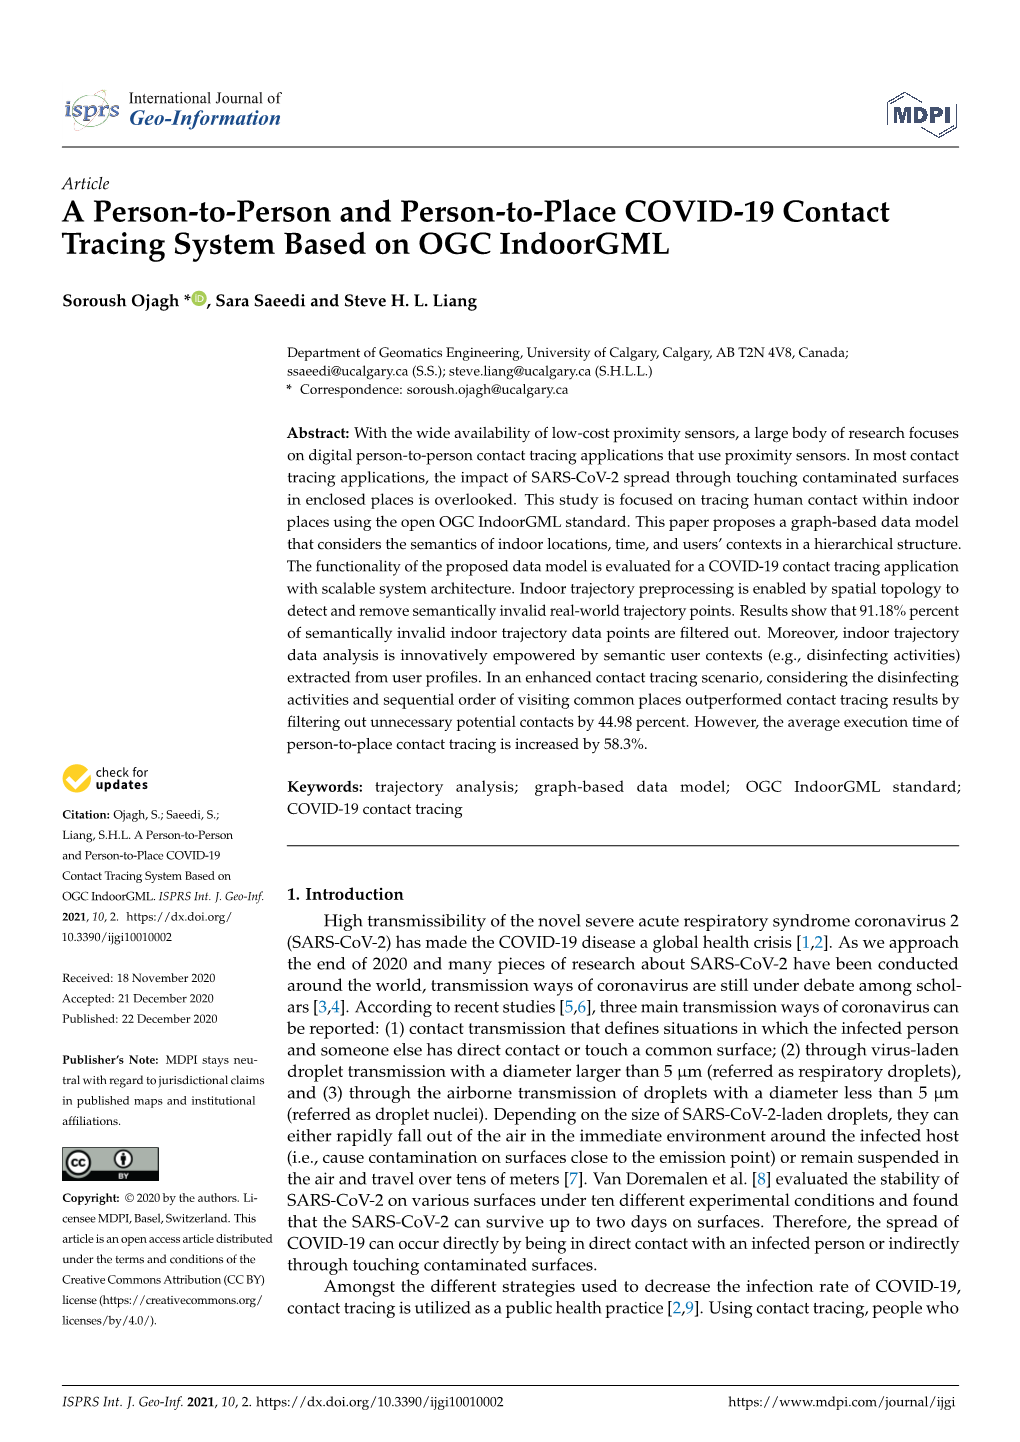 A Person-To-Person and Person-To-Place COVID-19 Contact Tracing System Based on OGC Indoorgml